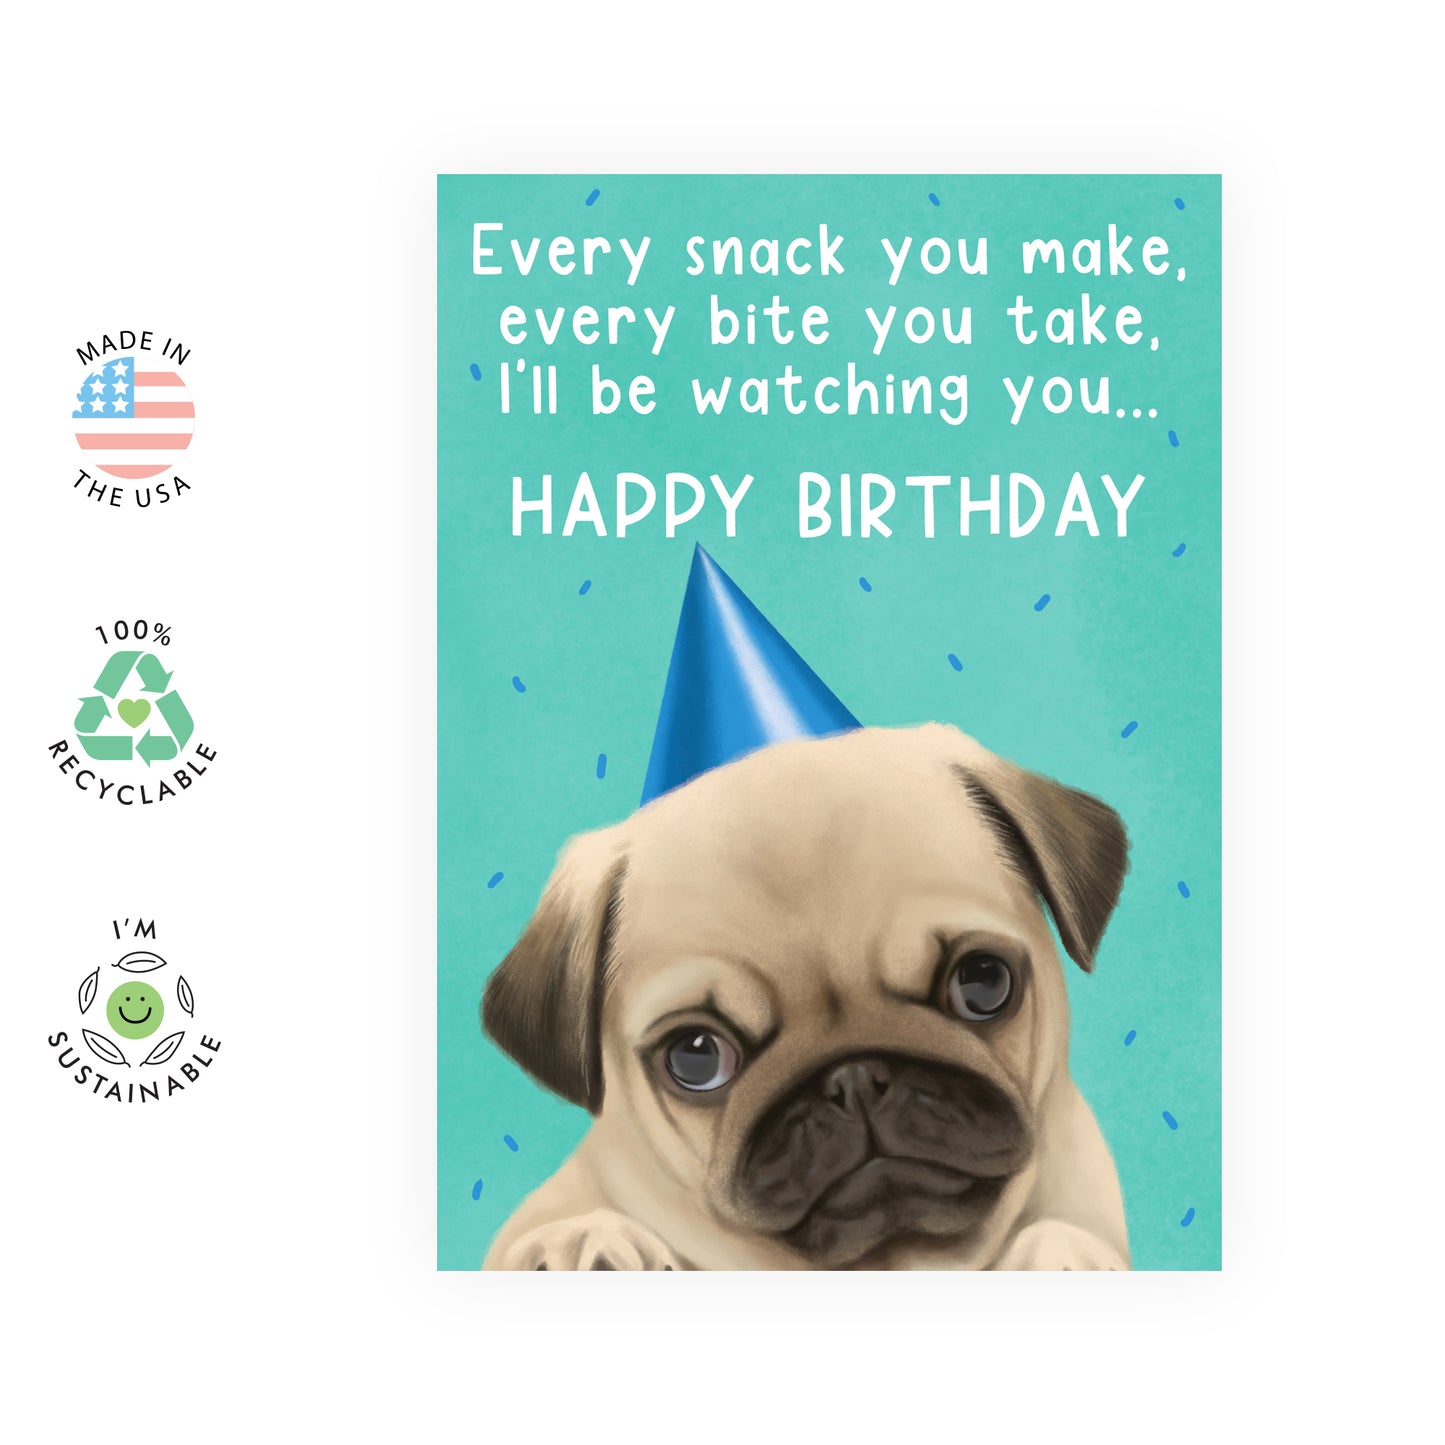 Cute Birthday Card - Every Snack You Make - For Men Women Him Her